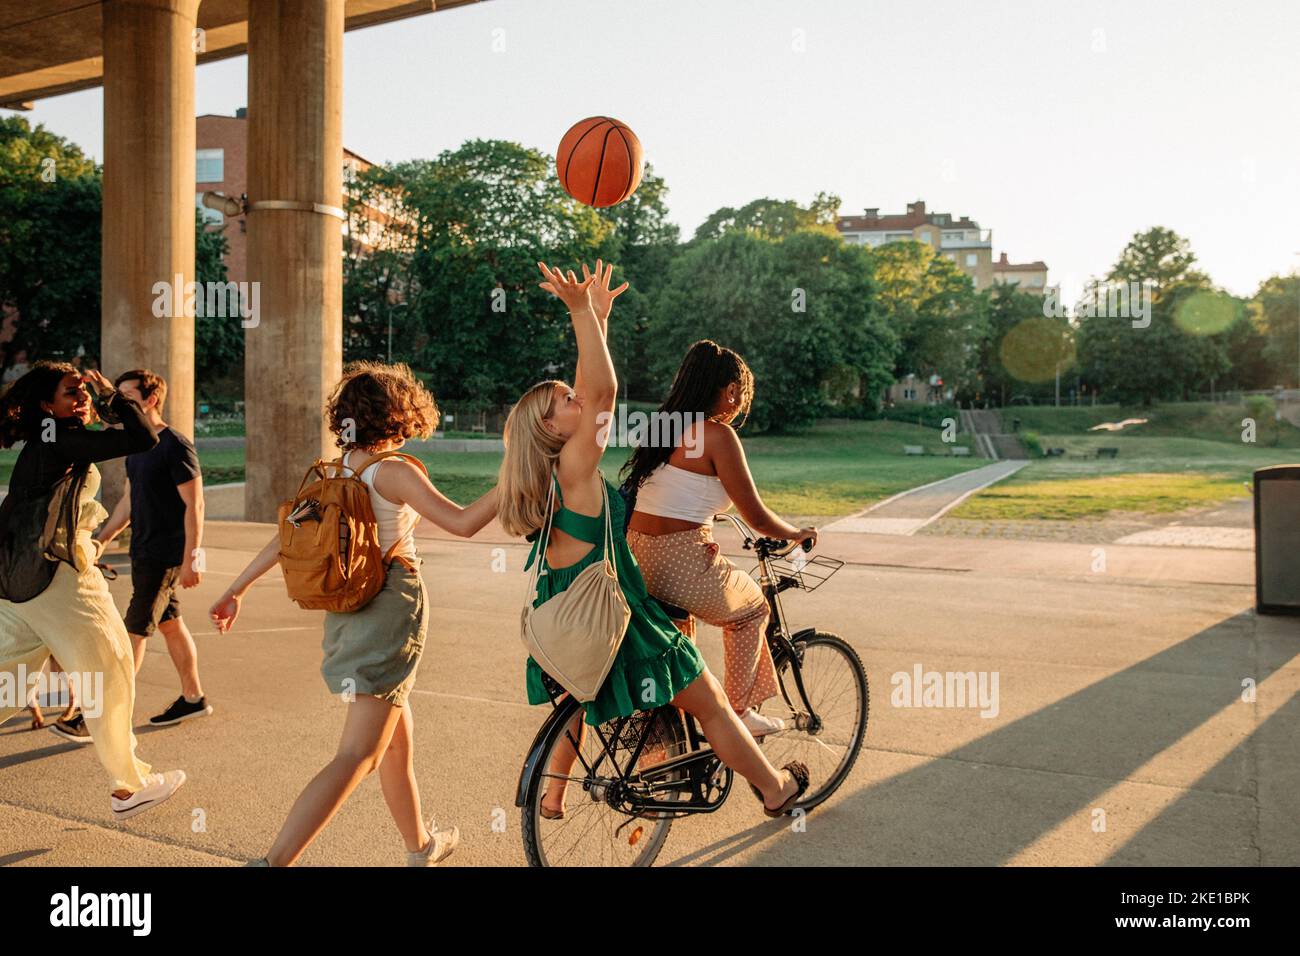 Rear view of teenage girl throwing basketball while sitting with female friend riding bicycle at park Stock Photo